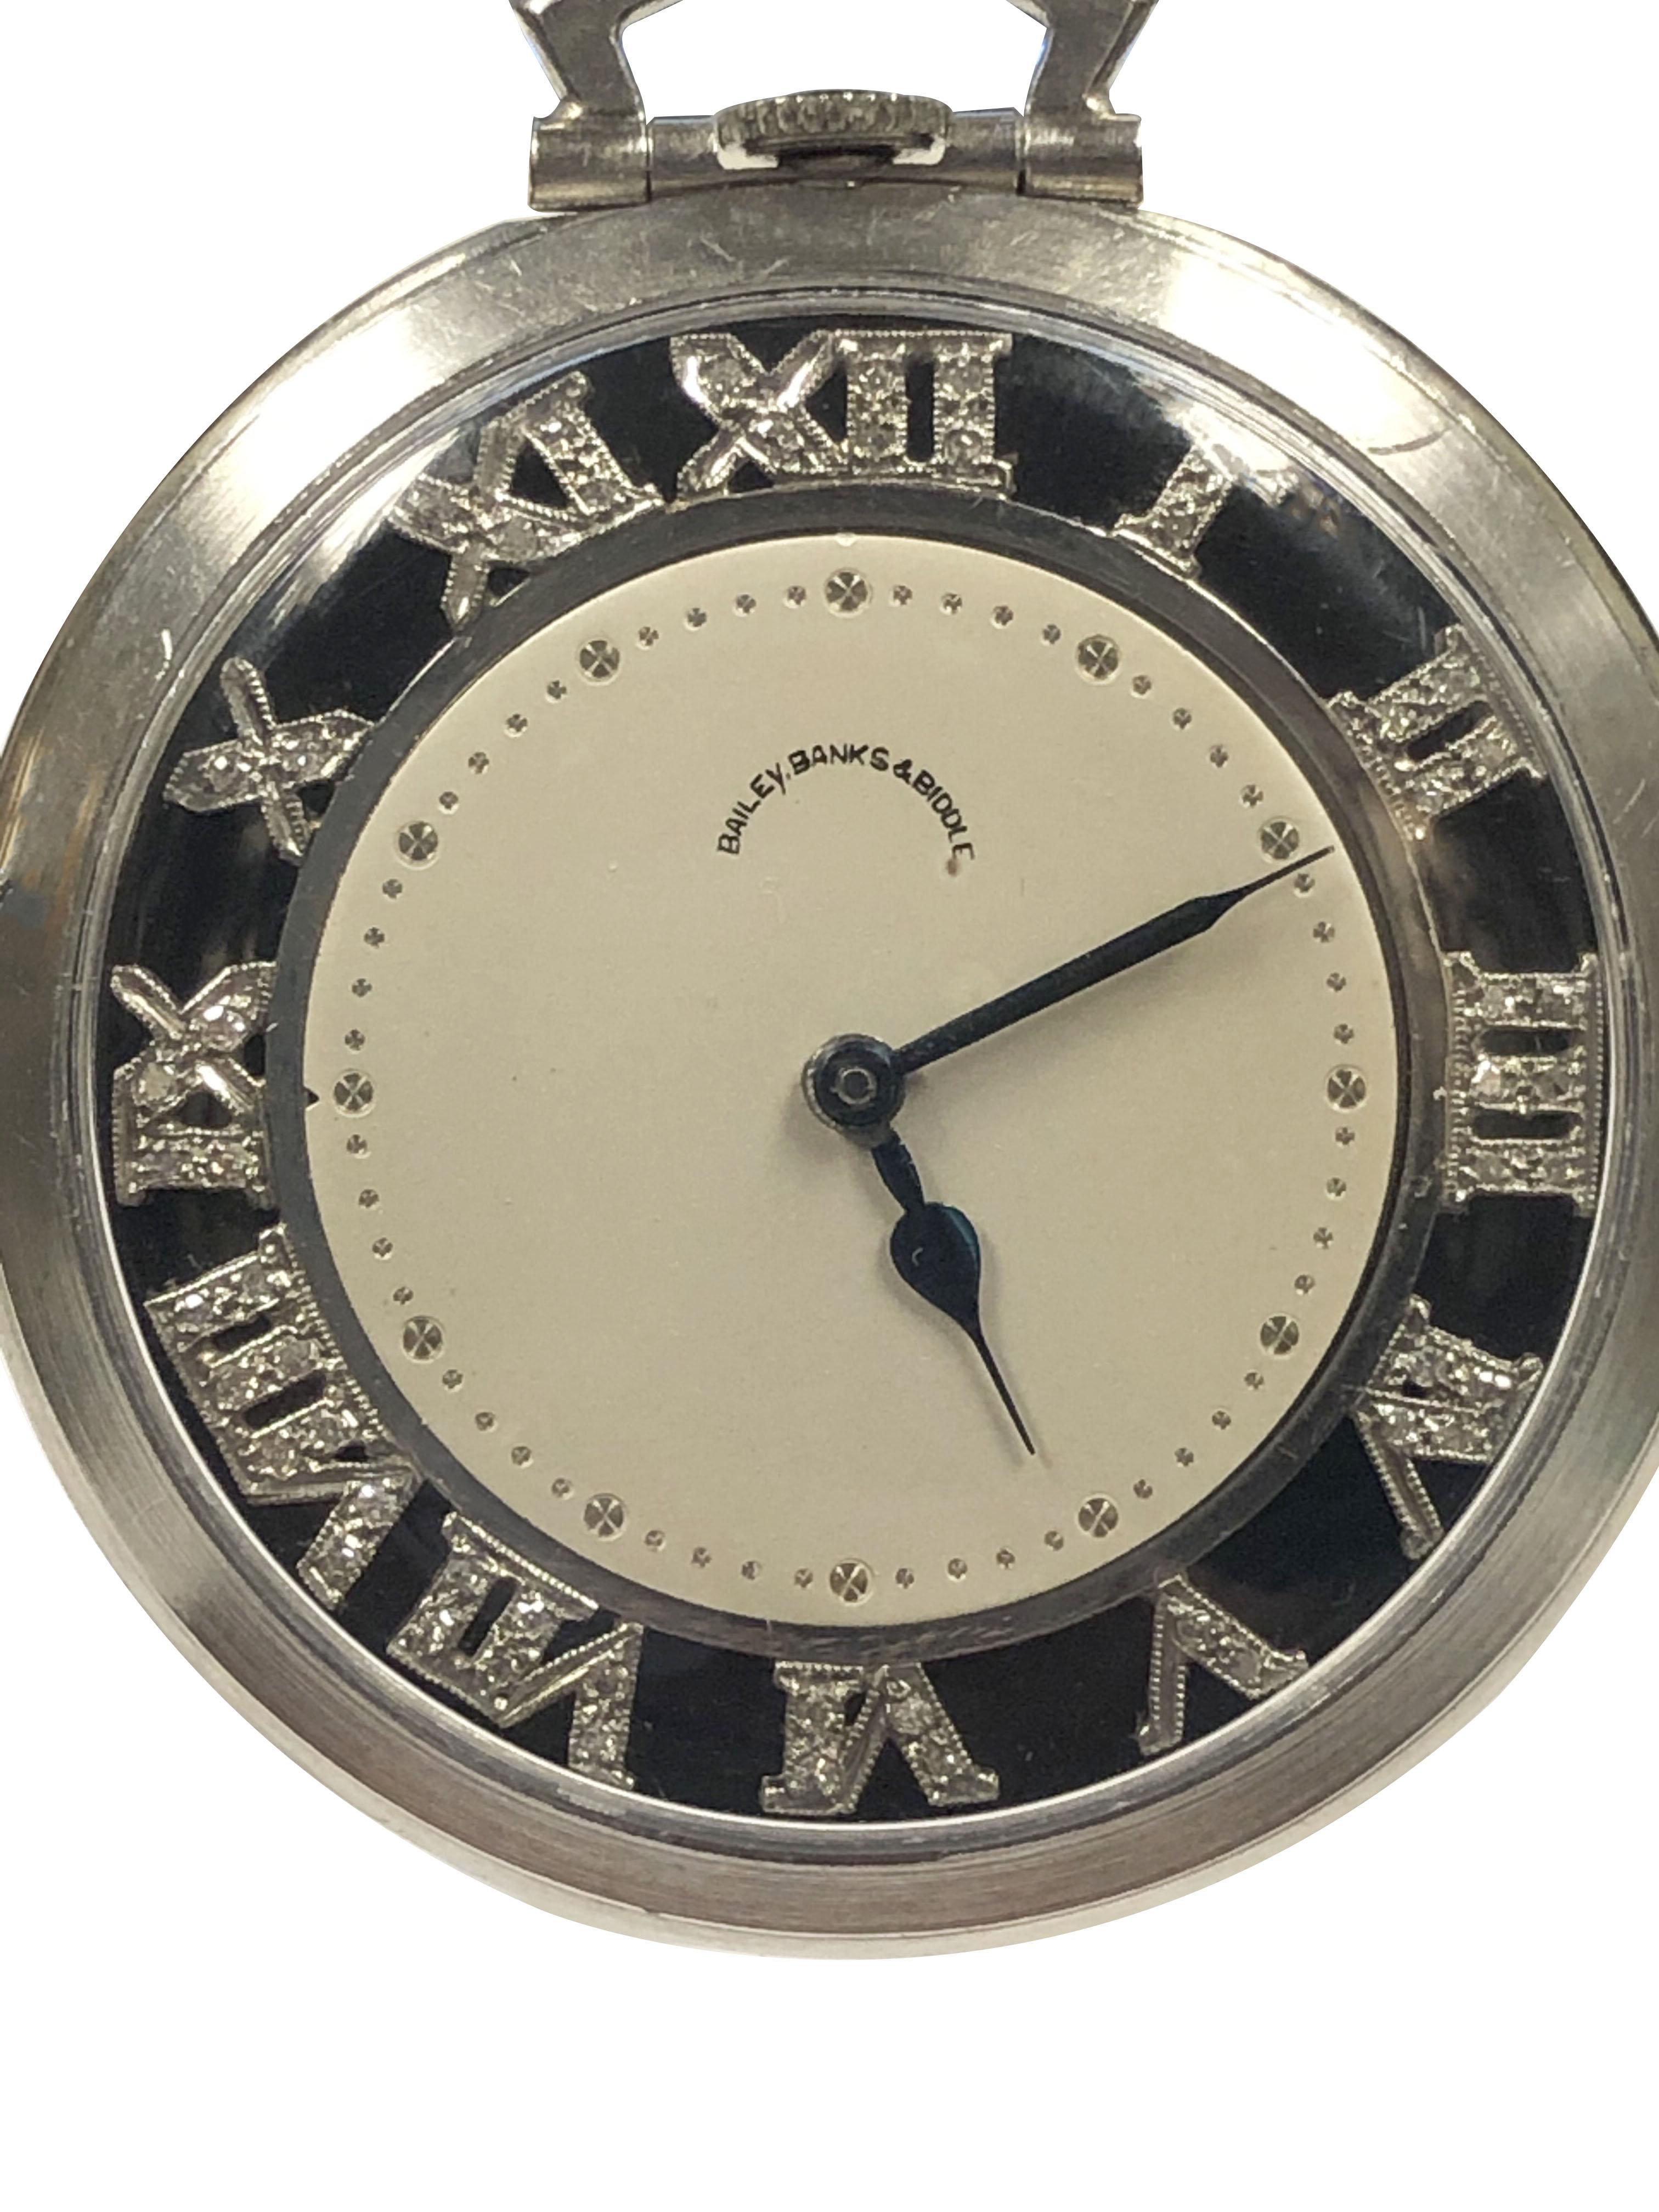 Circa 1930s Art Deco Pocket Watch, for Bailey Banks & Biddle, 42 M.M. Diameter and 8 M.M. thick 3 piece Platinum case, 17 Jewel Mechanical, Manual wind Nickle Lever movement by Max Landau Switzerland. Silver Satin center dial and a Black outer ring